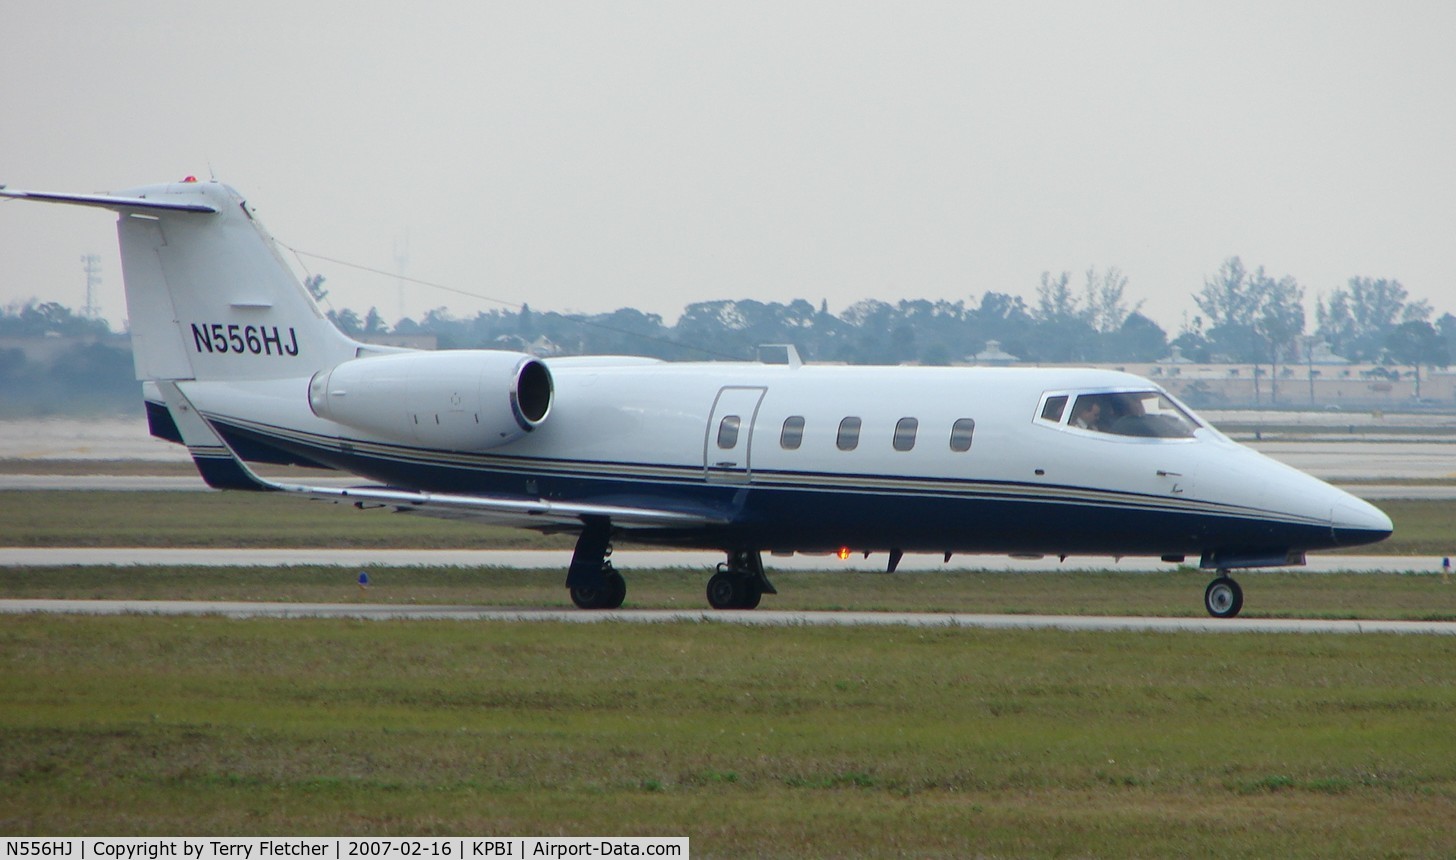 N556HJ, 1982 Gates Learjet 55 C/N 55-028, part of the Friday afternoon arrivals 'rush' at PBI